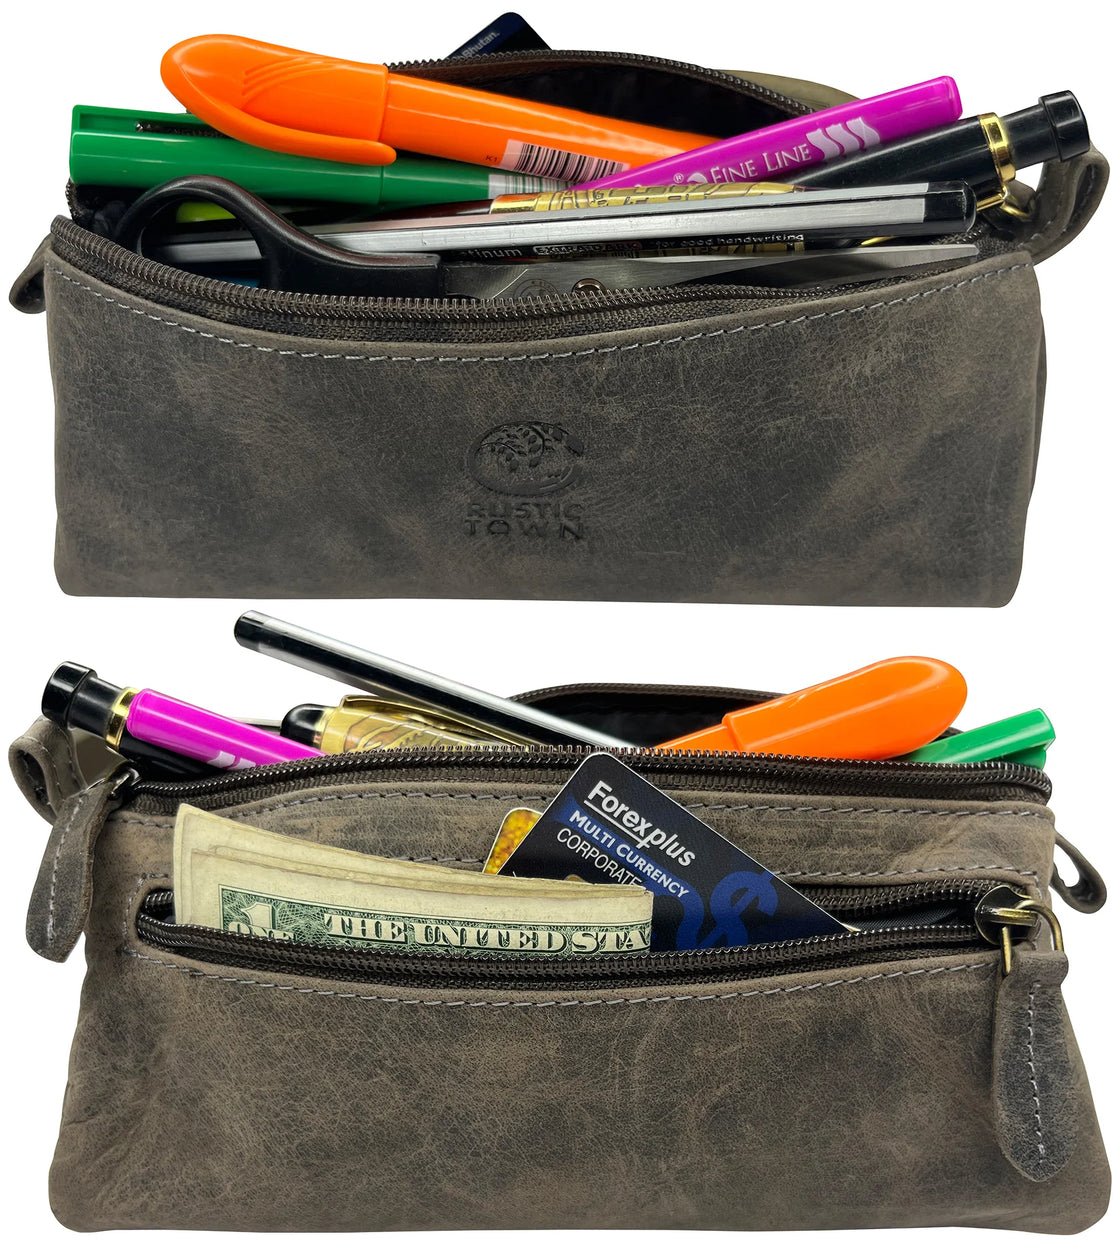 Genuine Leather Pencil Cases by Creative Mark